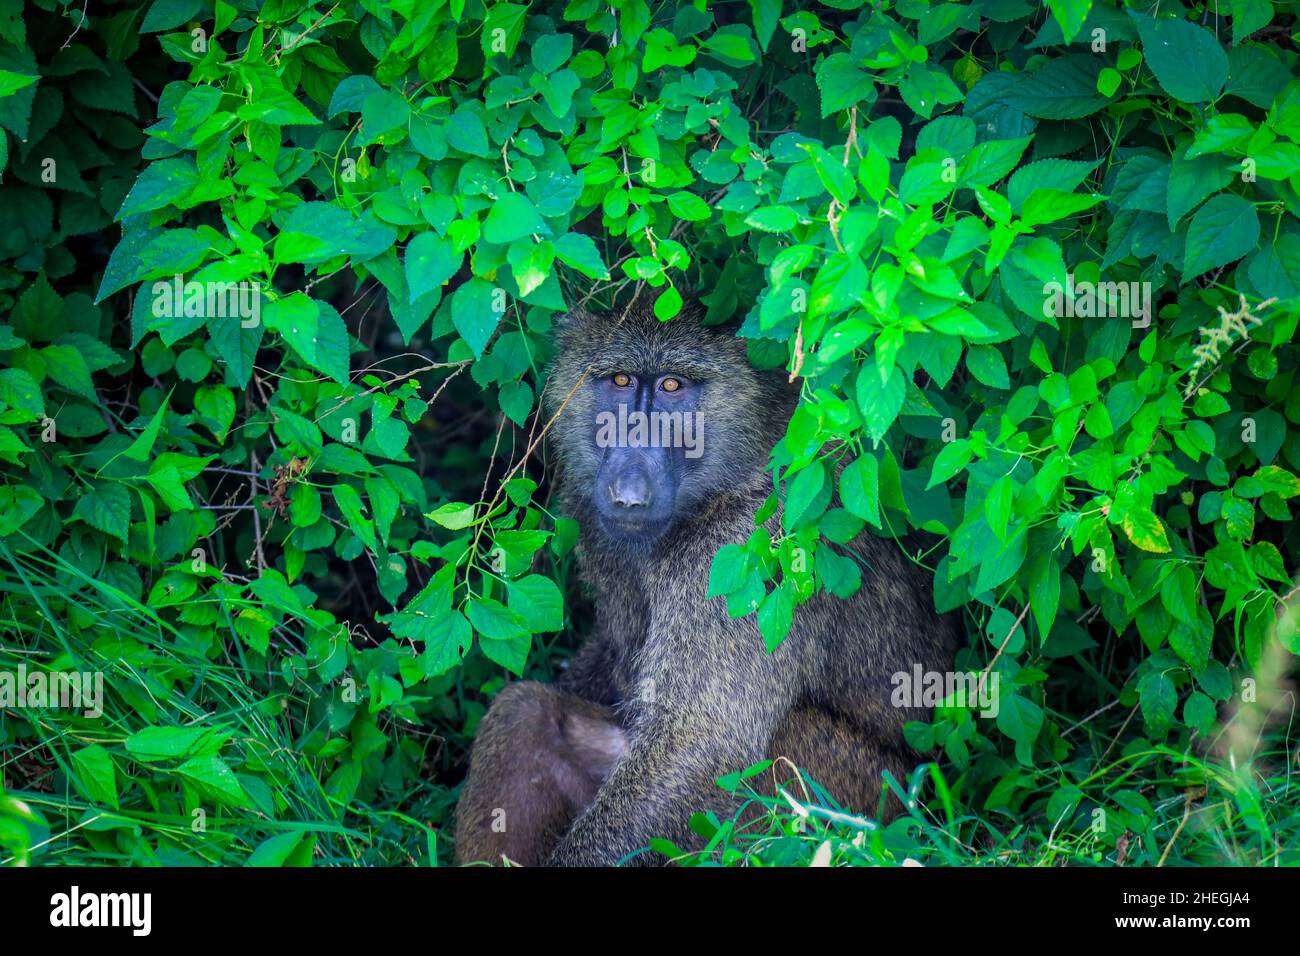 Close up portrait of Papio anubis monkey in the green leaves of African forest, Ethiopia Stock Photo